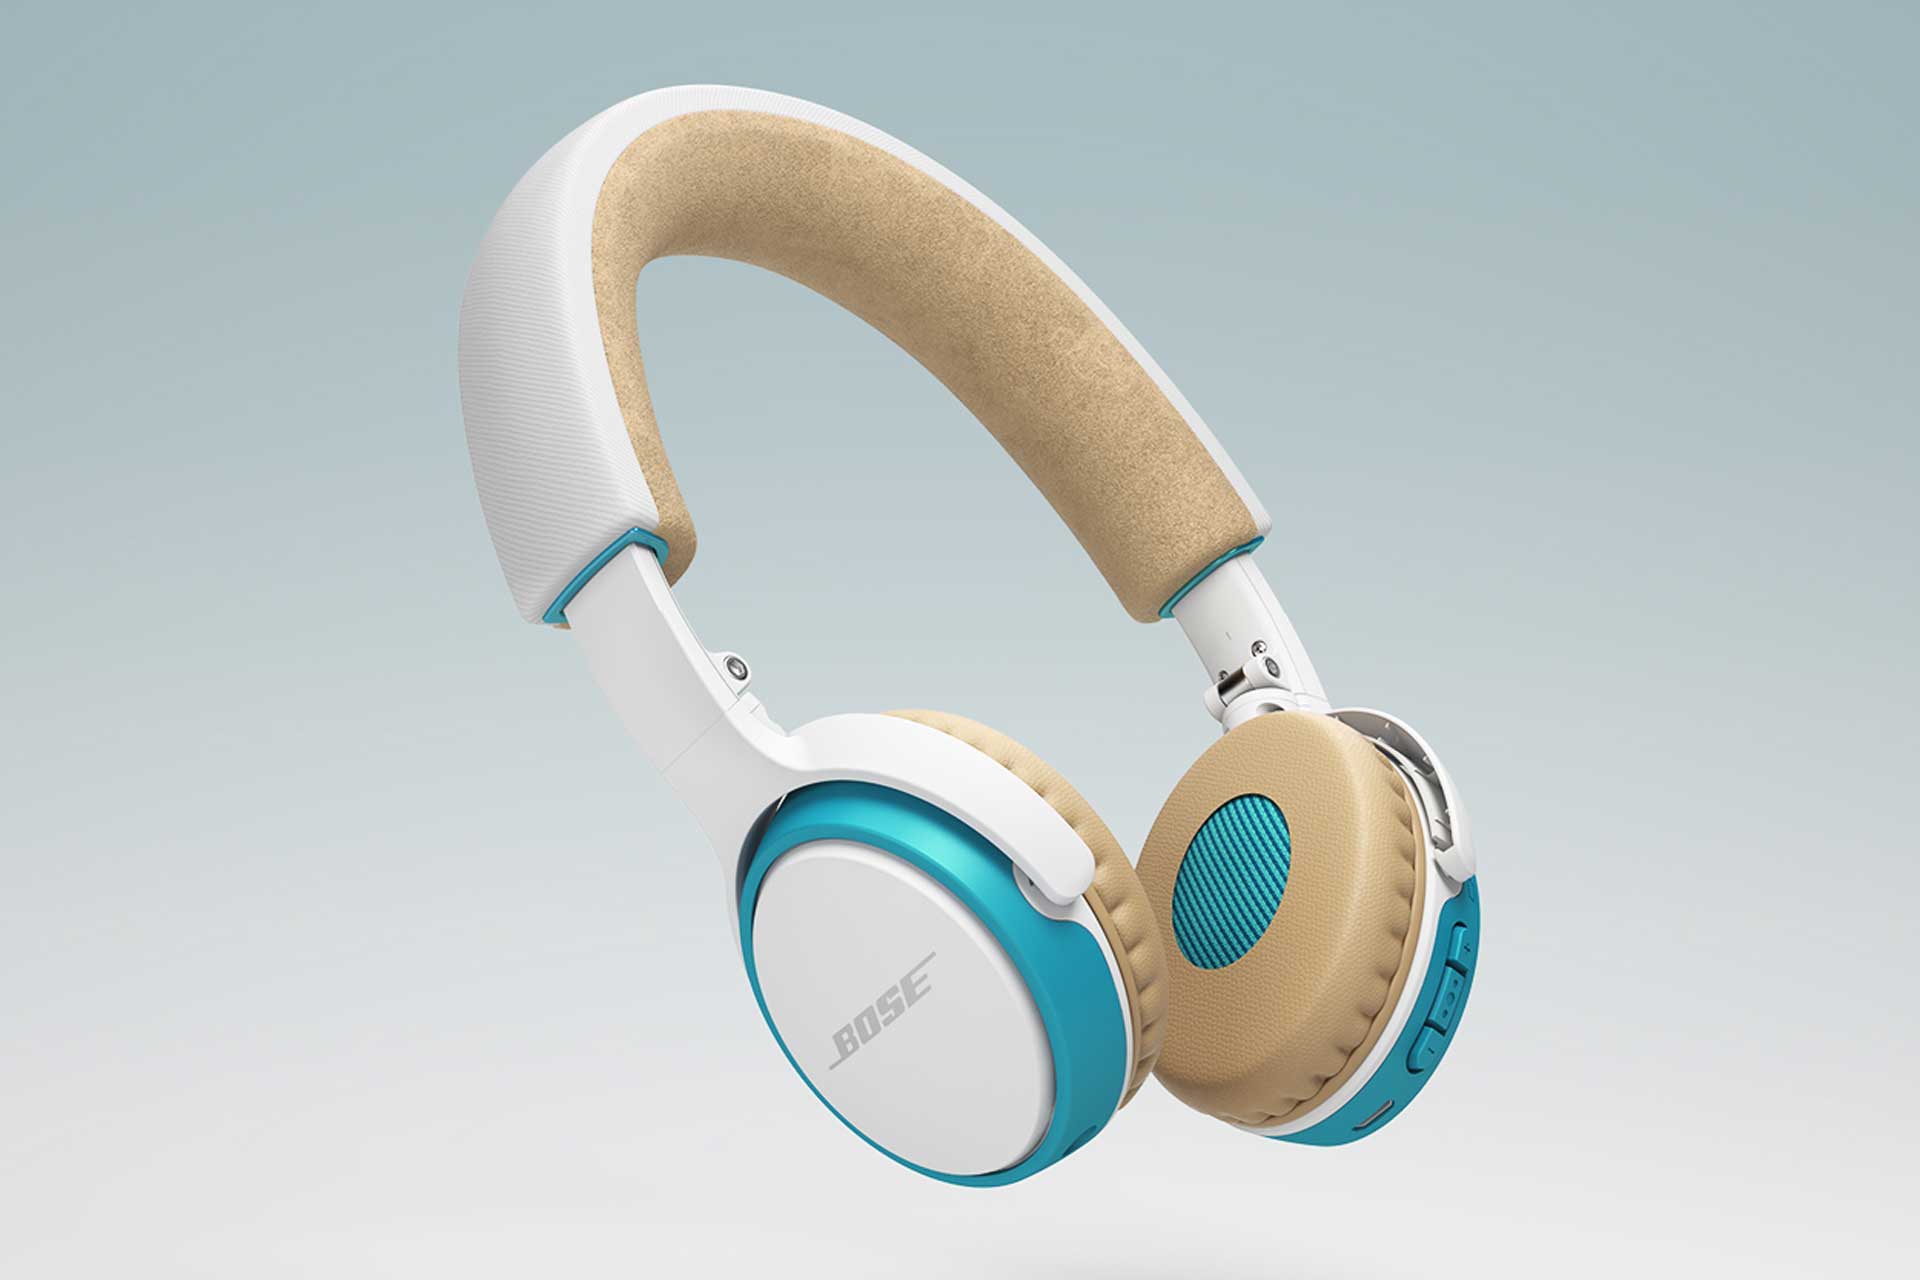 Side view image of blue, white, and tan BOSE wireless headphones